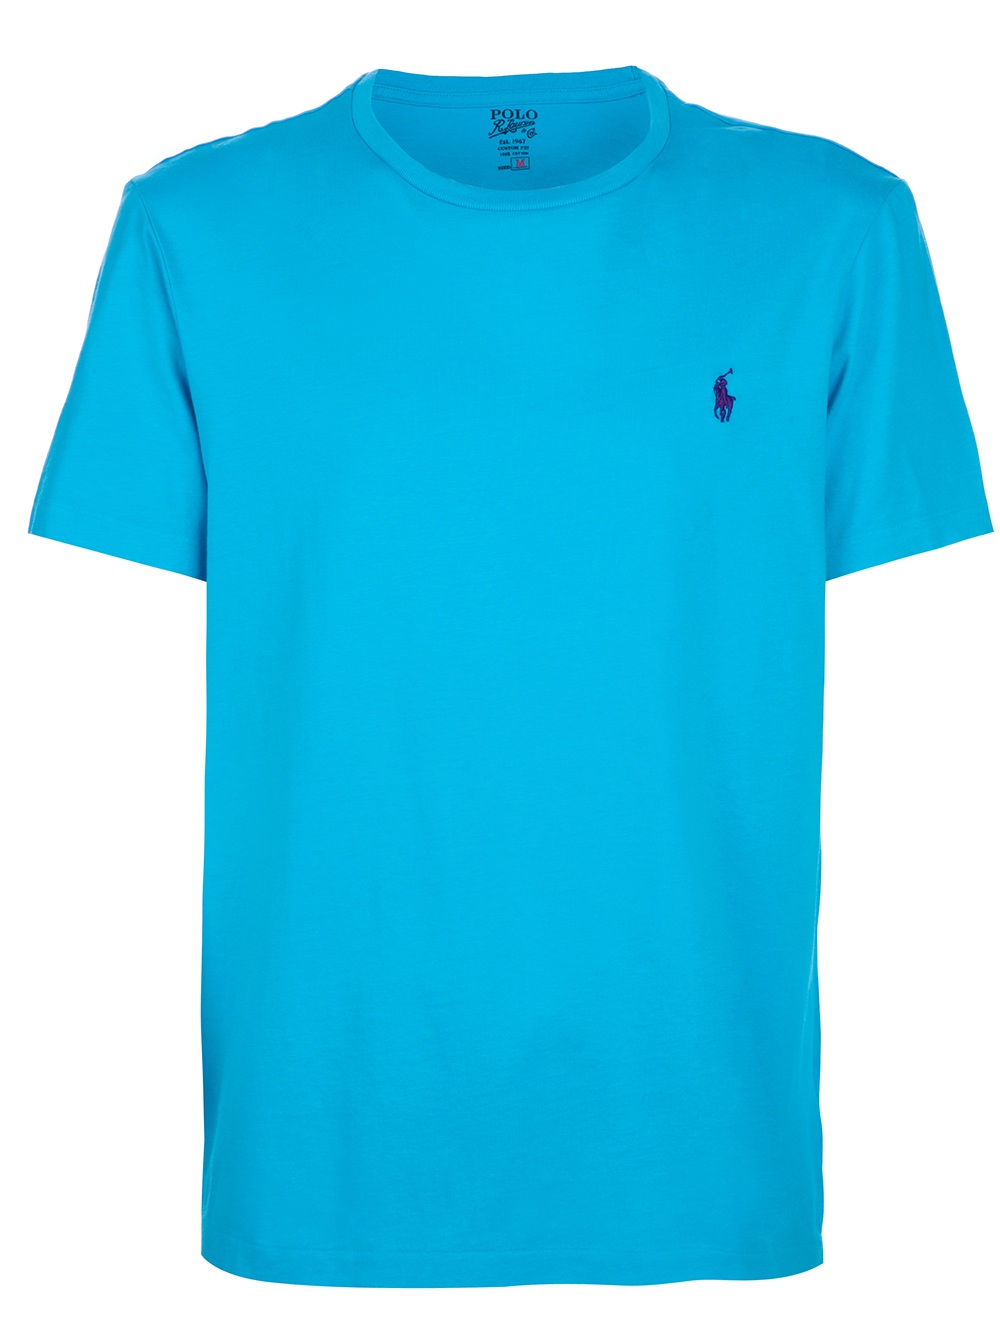 Polo Ralph Lauren Classic T-shirt in Turquoise (Blue) for Men - Lyst